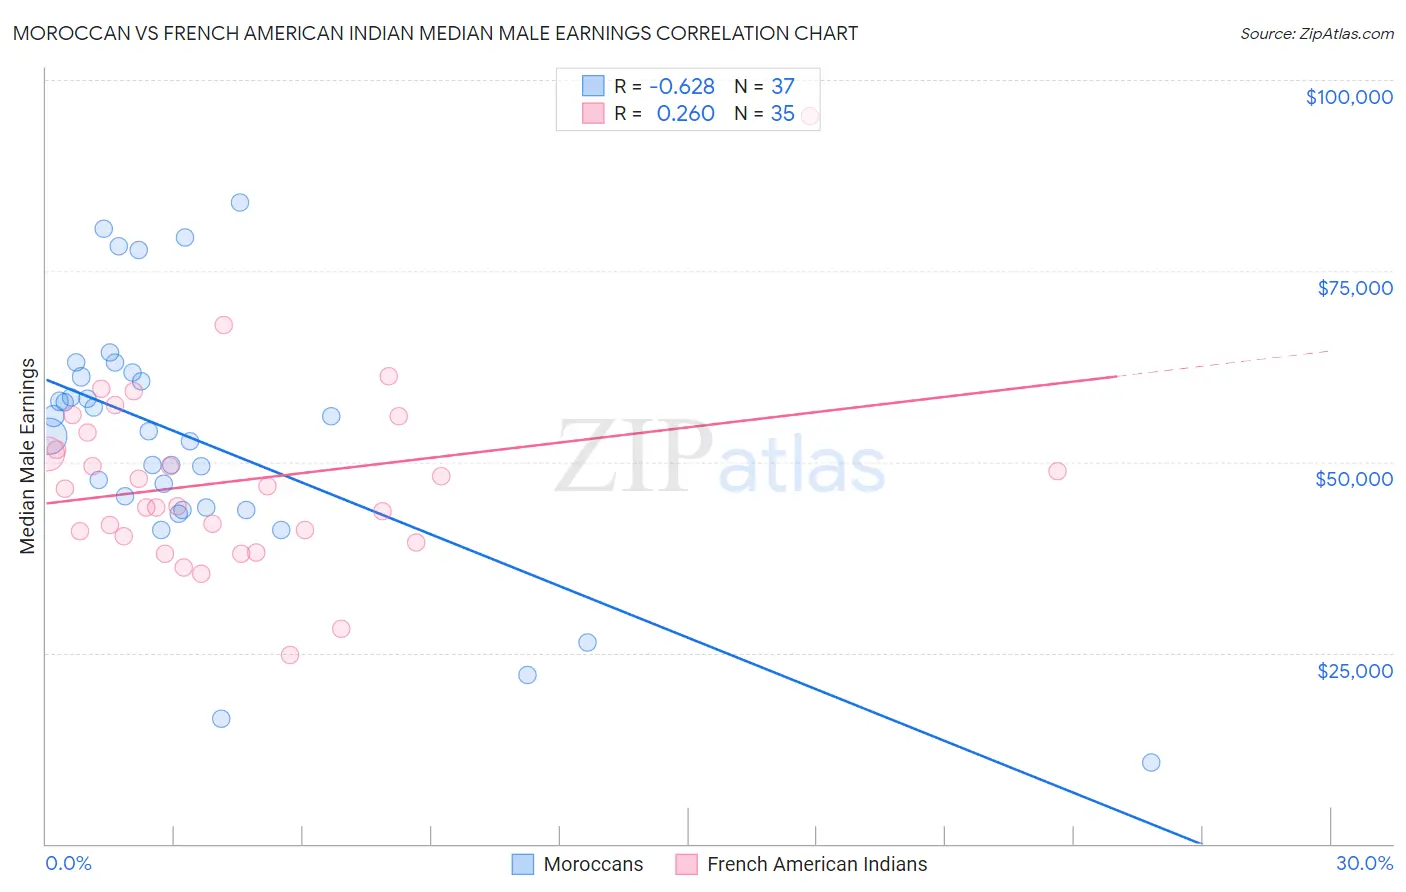 Moroccan vs French American Indian Median Male Earnings